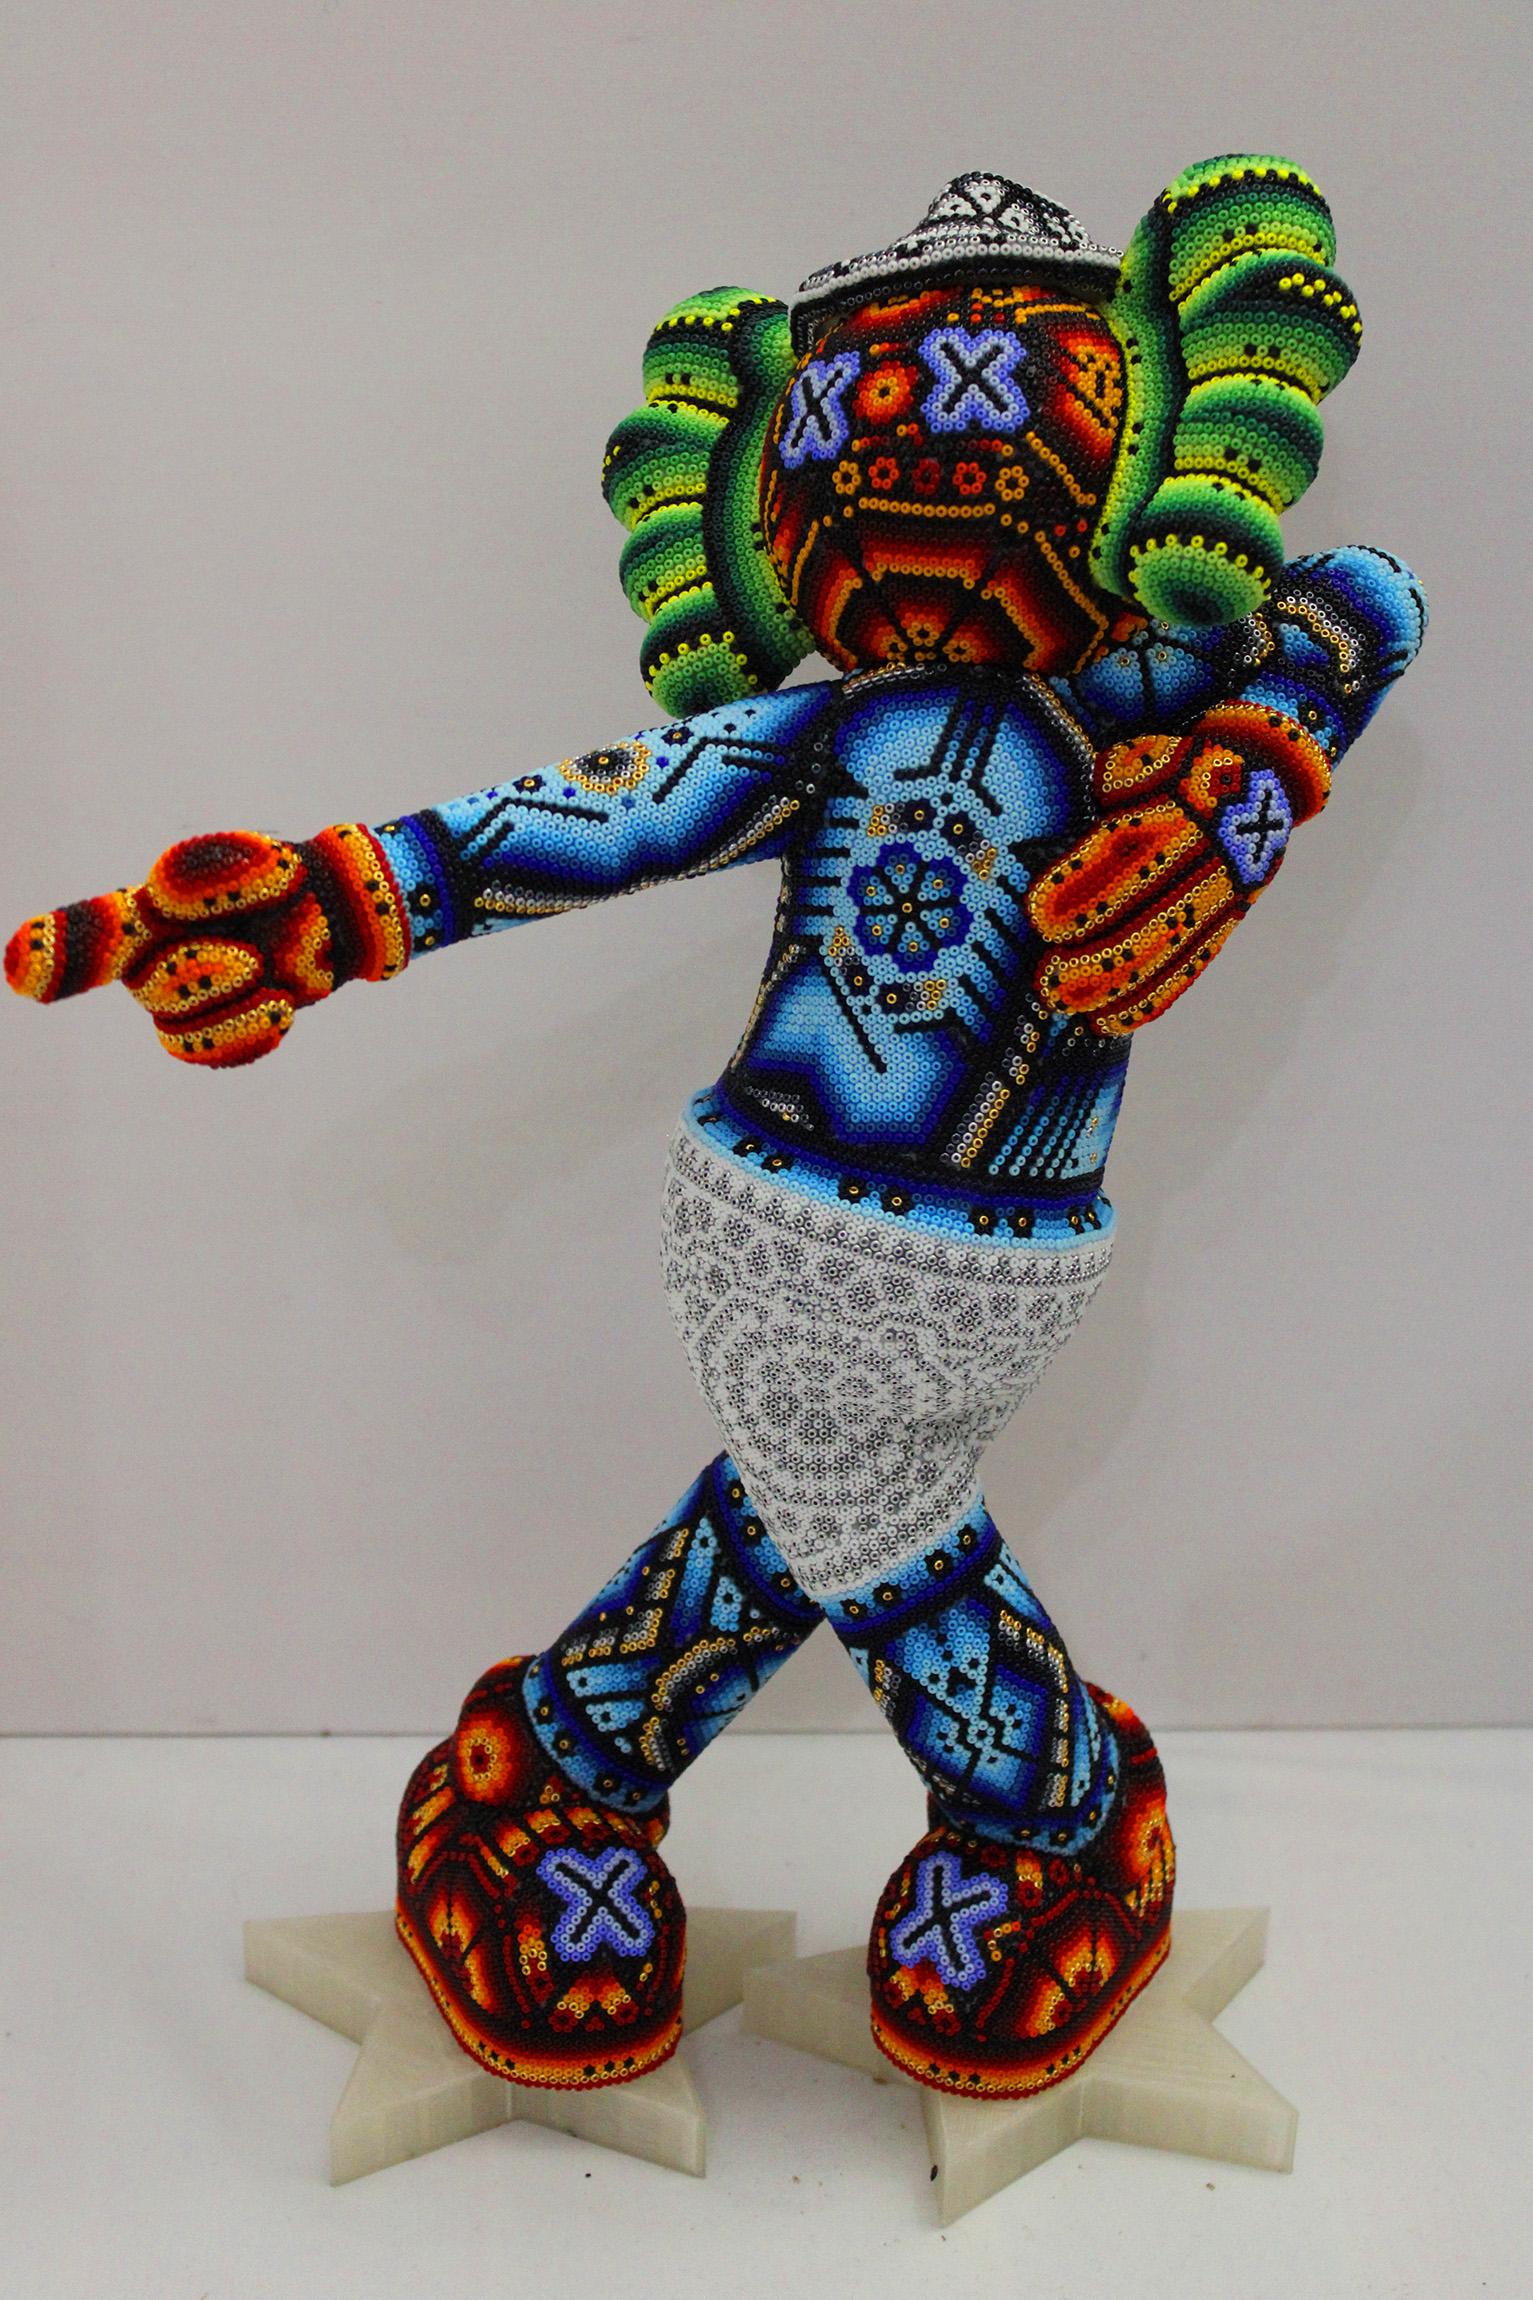 CHROMA aka Rick Wolfryd  Abstract Sculpture - "Popstar with Hat" Mini from Huichol ALTERATIONS Series